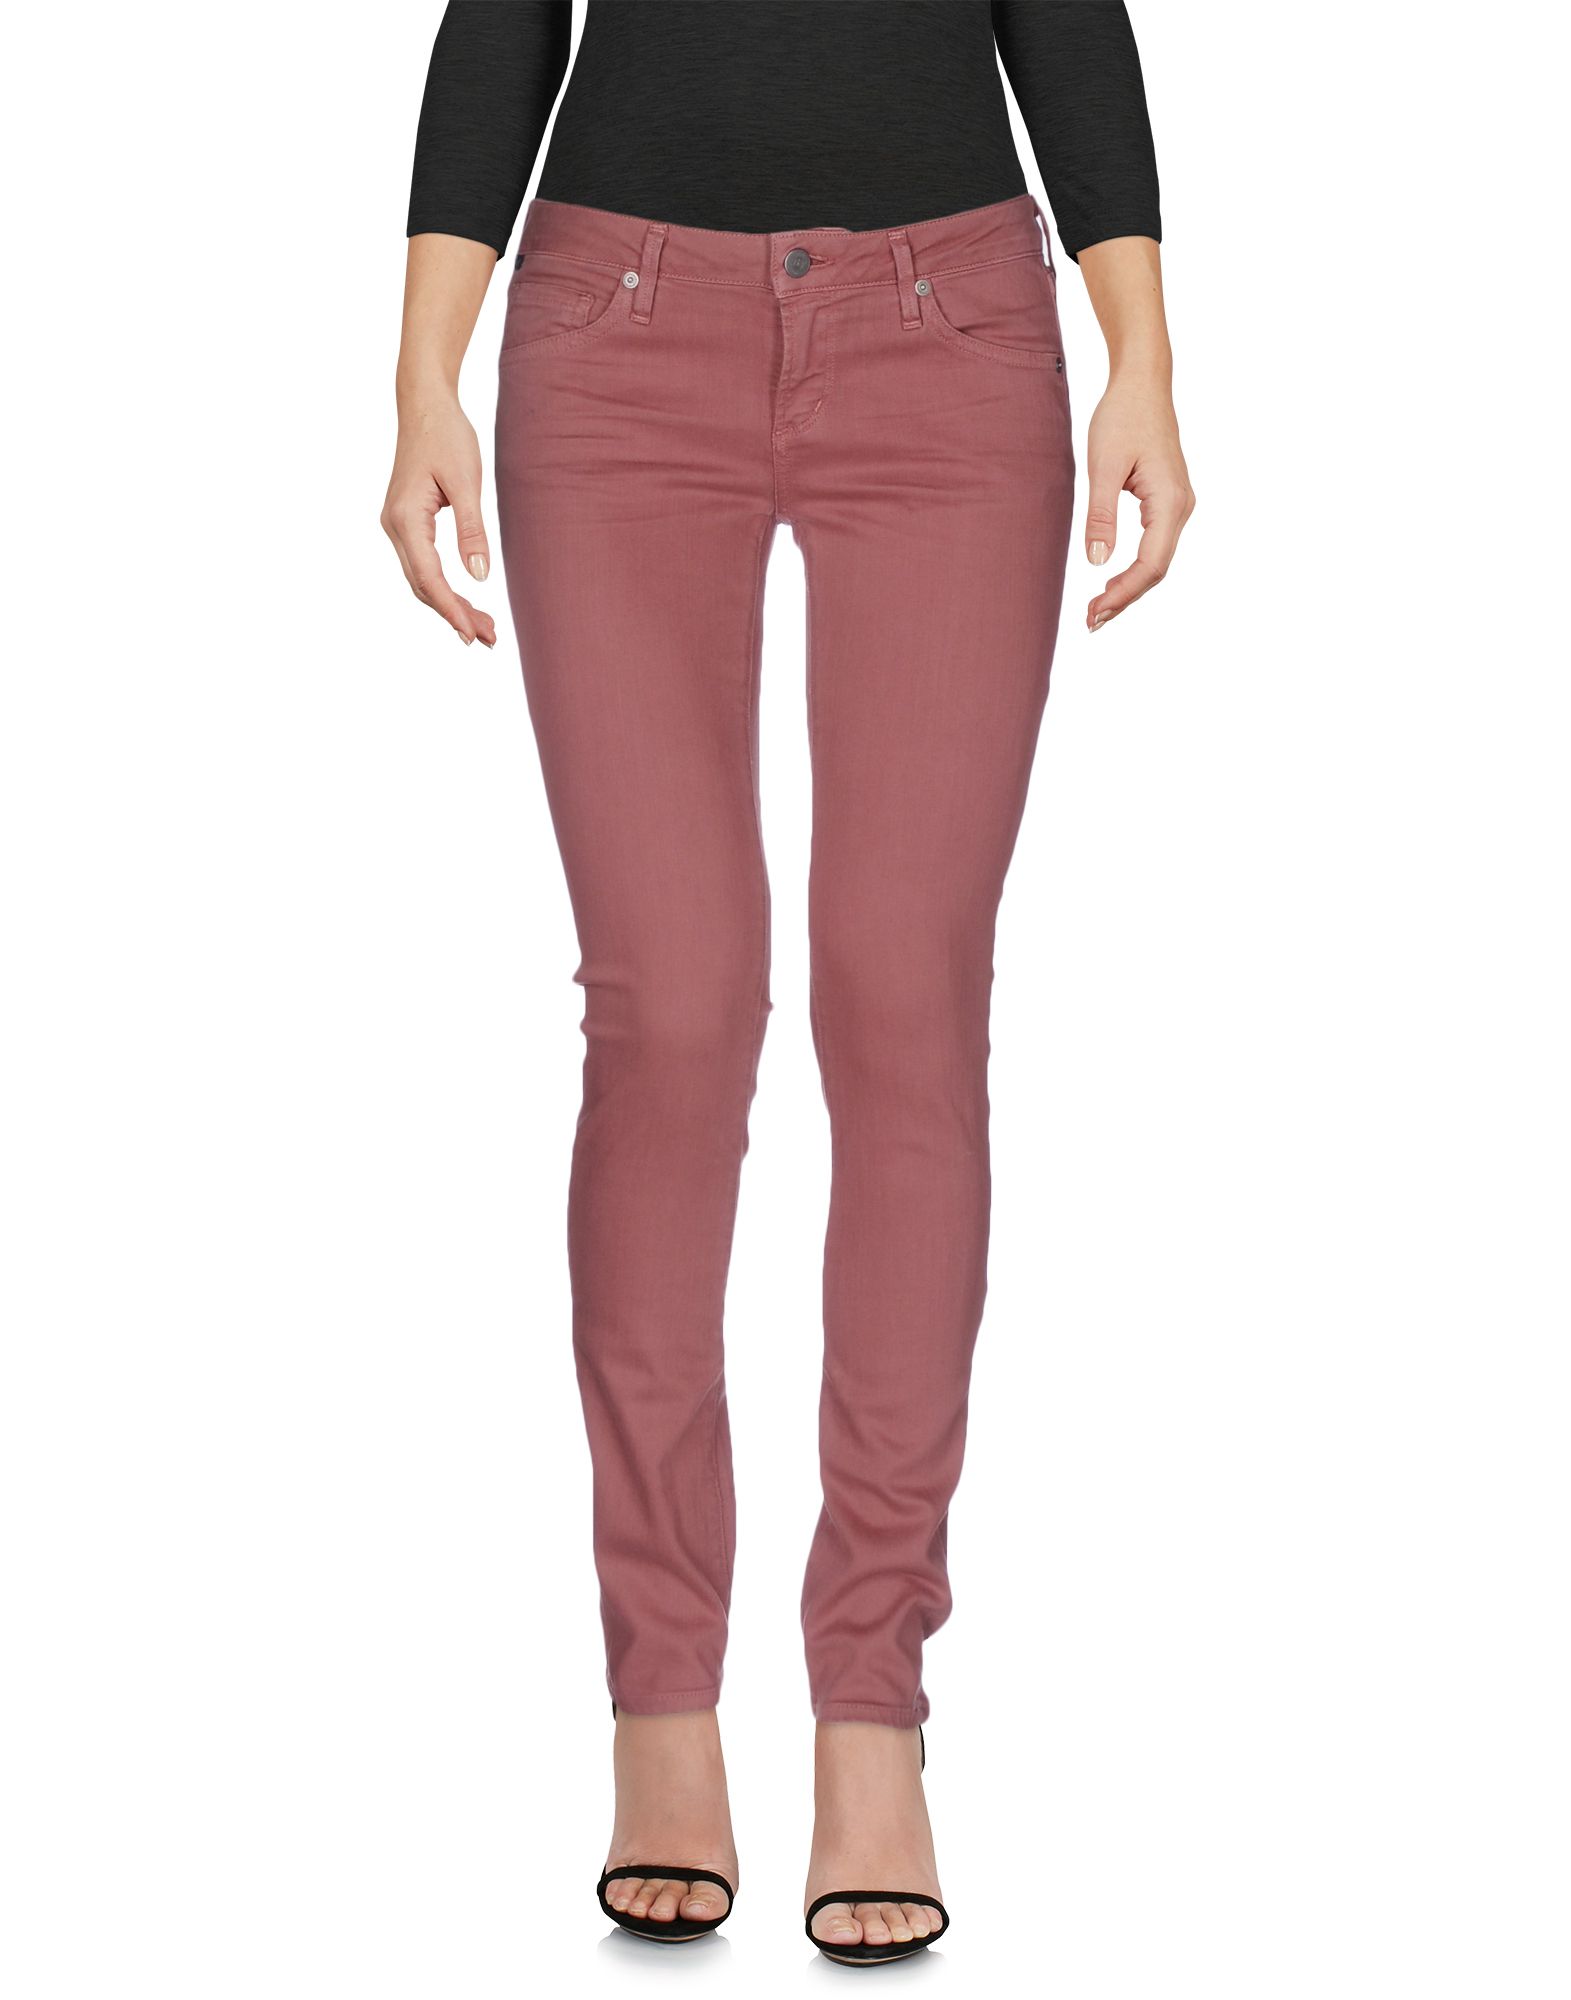 Citizens Of Humanity Denim Pants In Pastel Pink